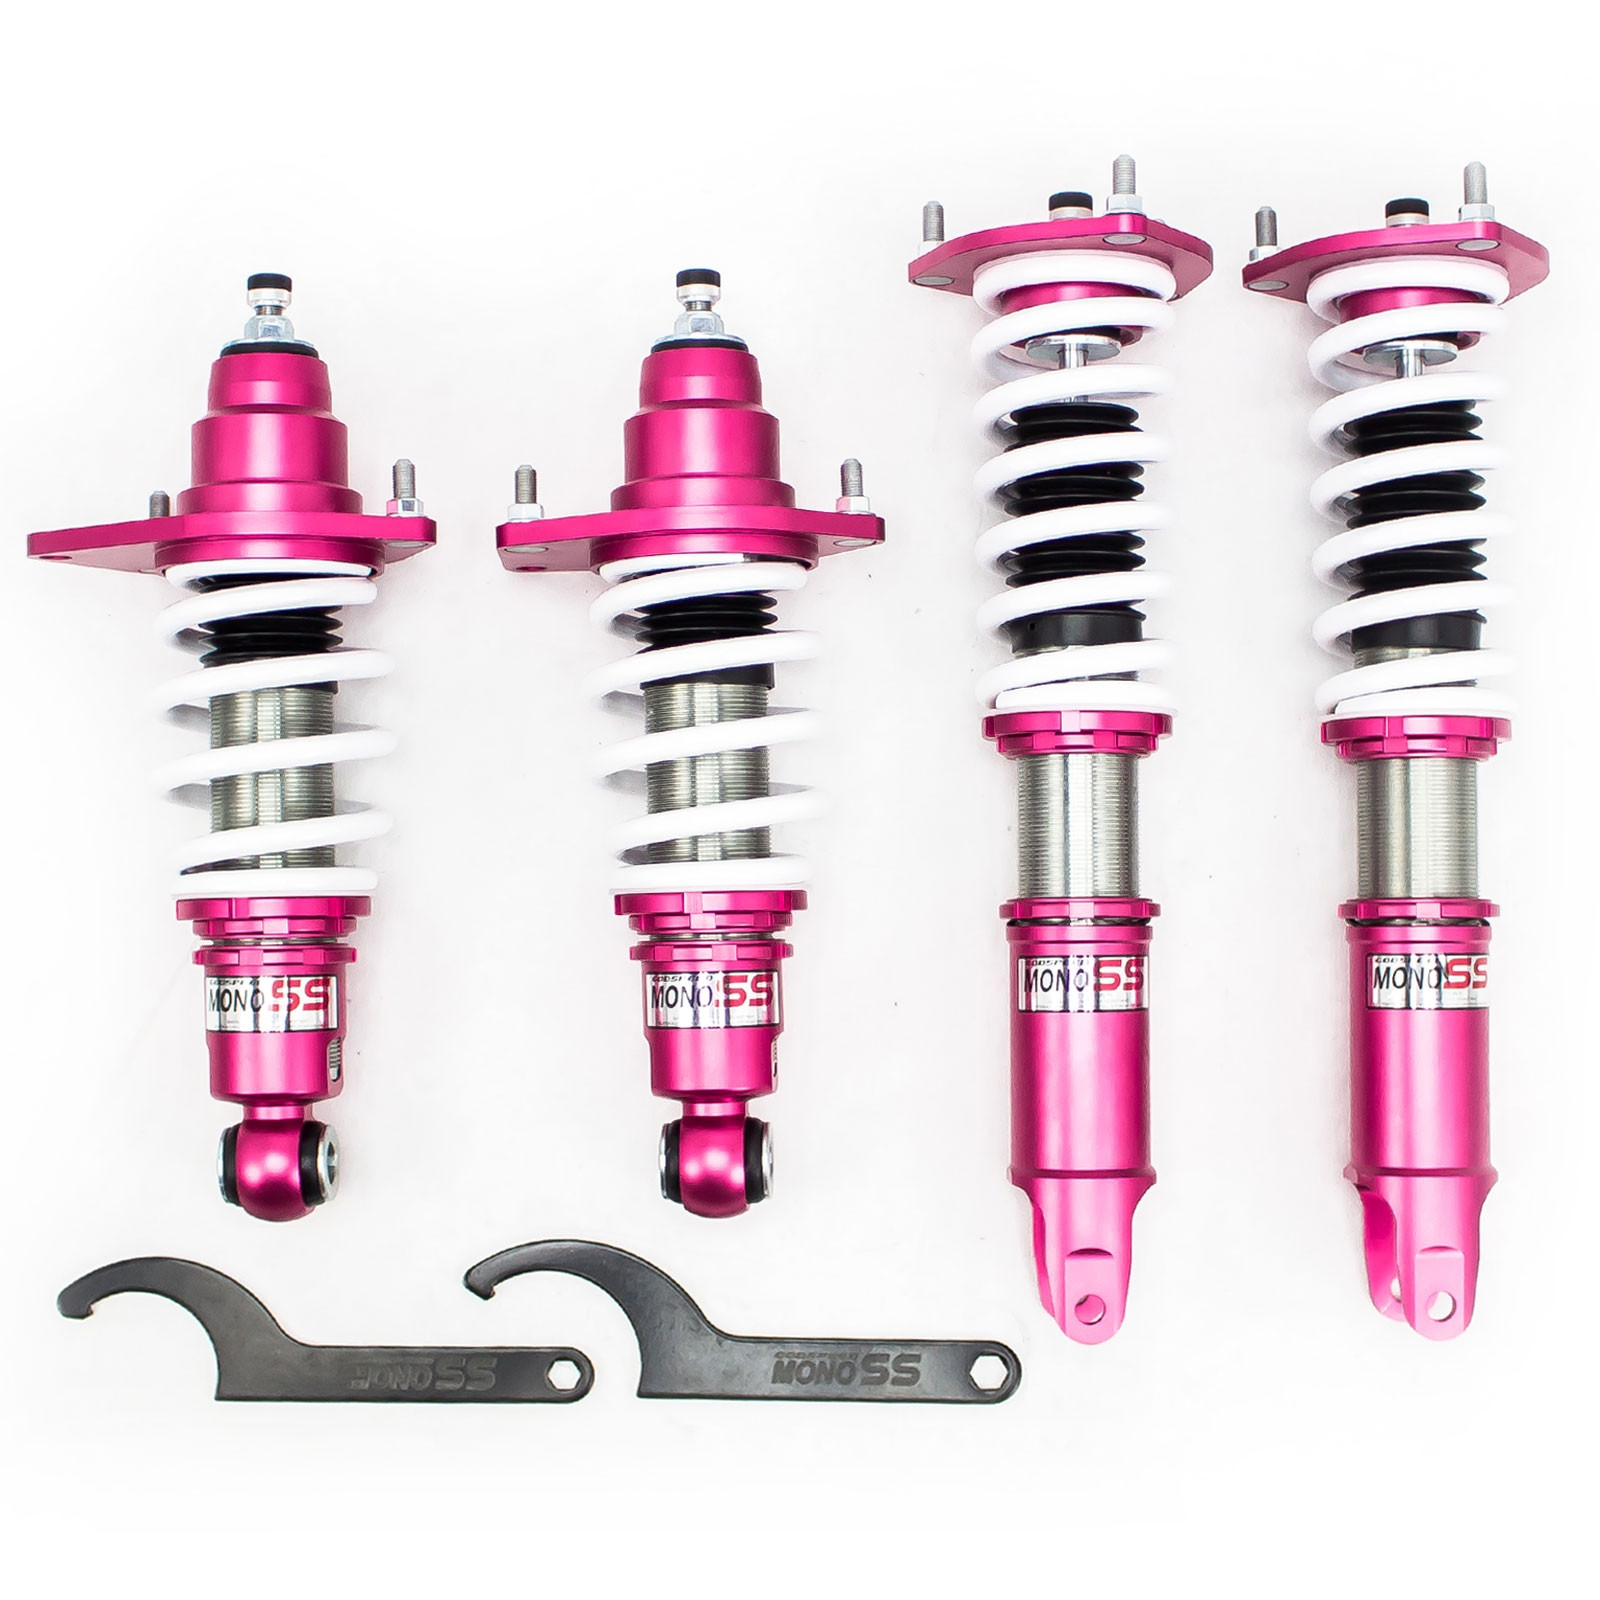 R9-HS2-106 made for Mazda Miata NC 2006-14 Hyper-Street II Coilovers Lowering Kit by Rev9 32 Damping Level Adjustment